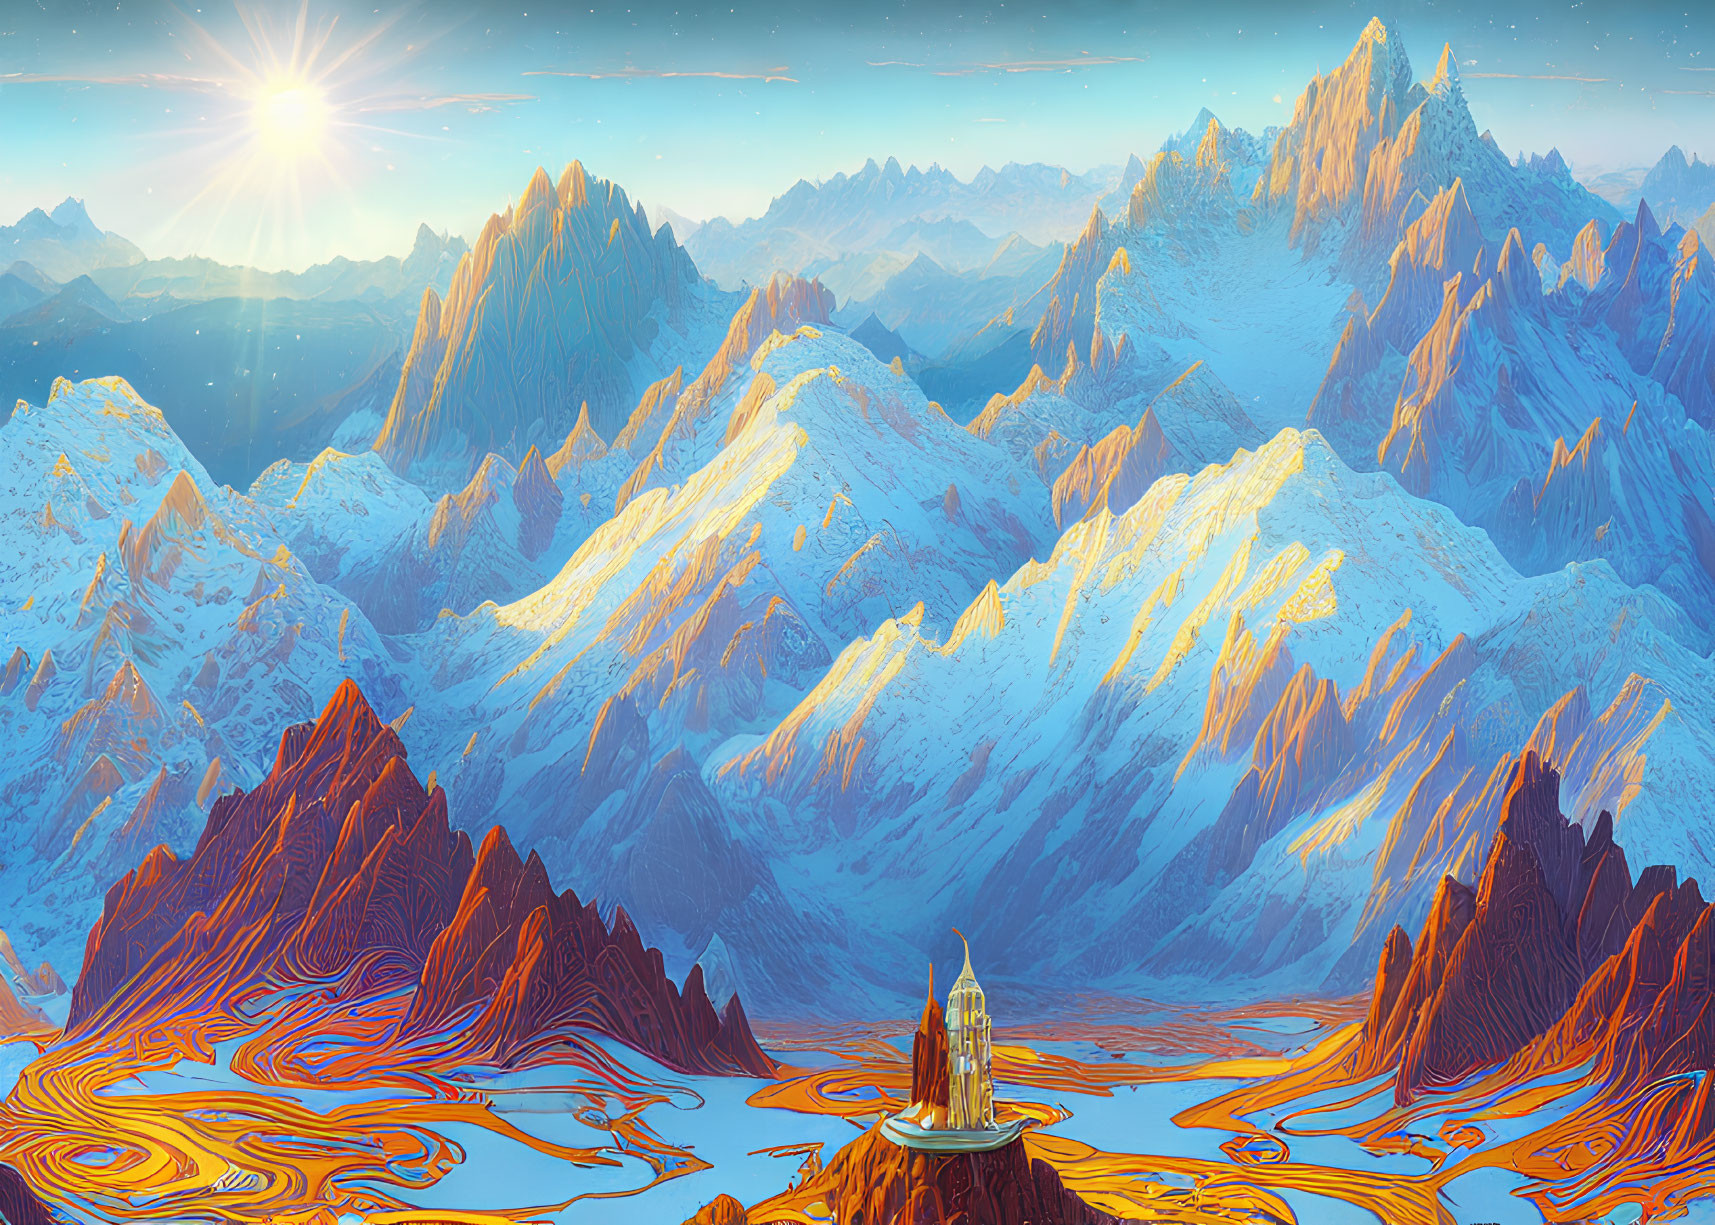 Fantasy Mountain Landscape with Glowing River and Solitary Tower